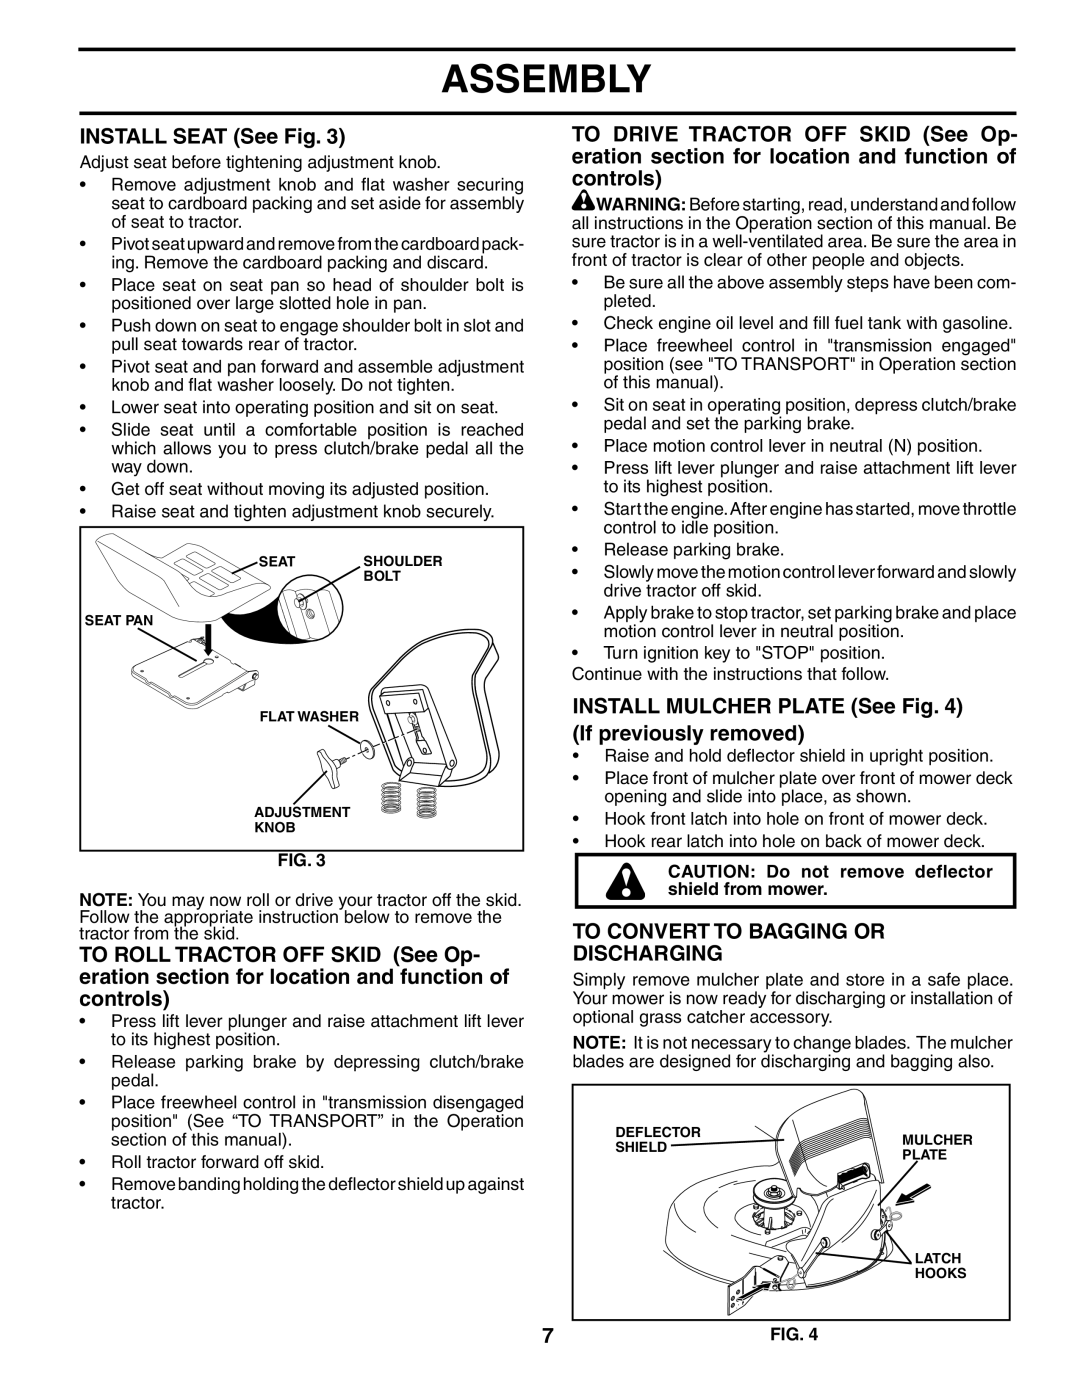 Husqvarna YTH2242 owner manual INSTALL SEAT See Fig, INSTALL MULCHER PLATE See If previously removed, Assembly 